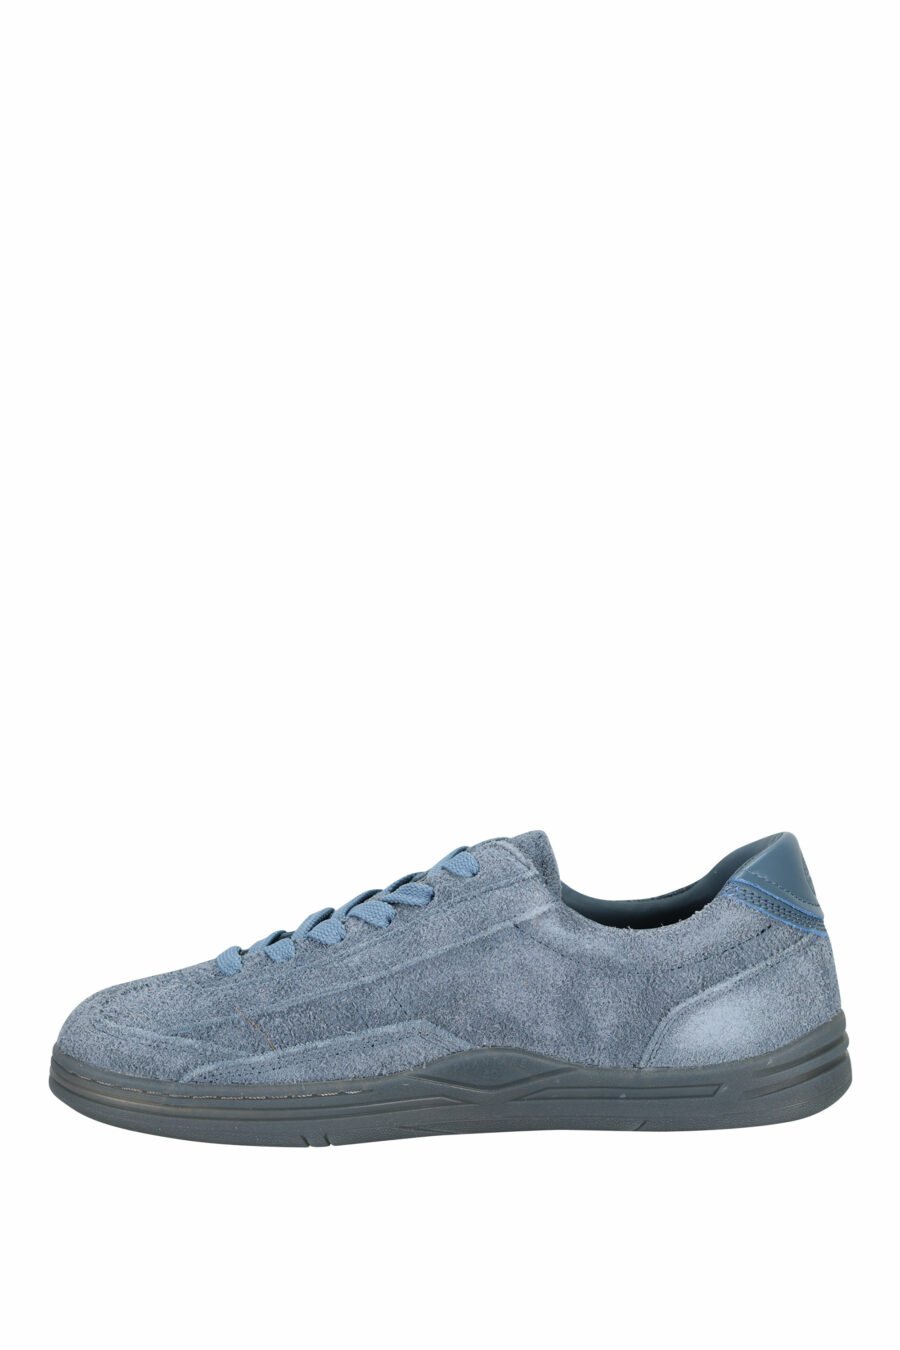 Dark blue trainers with minilogo and grey sole - 8052572937866 2